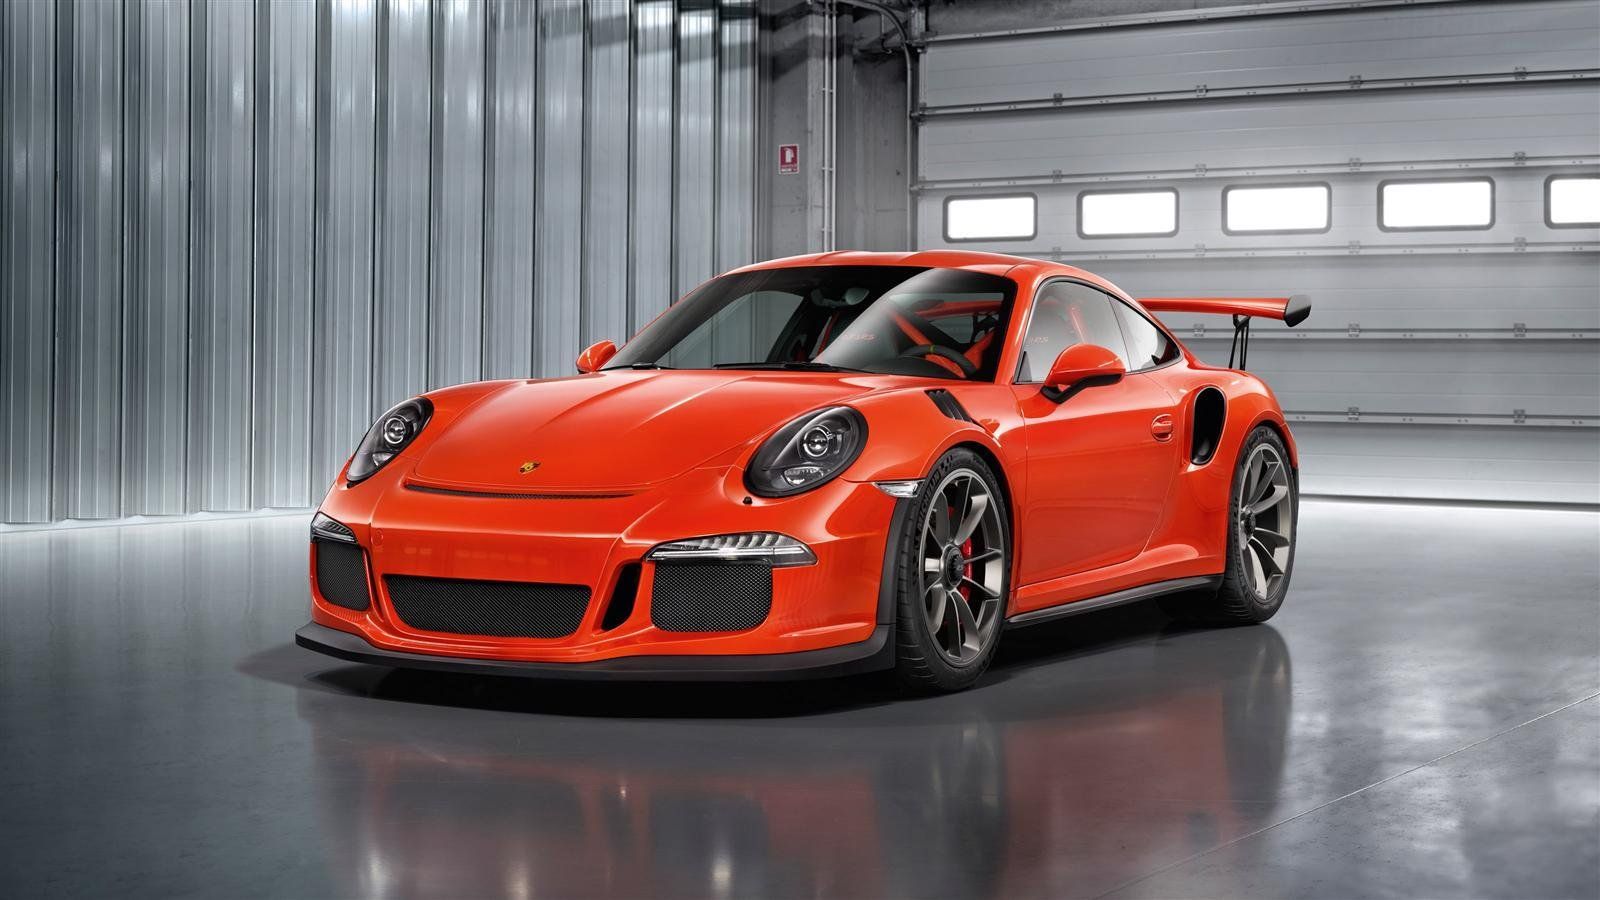 Porsche 911 GT3 RS Picture, Photo, Wallpaper And Videos